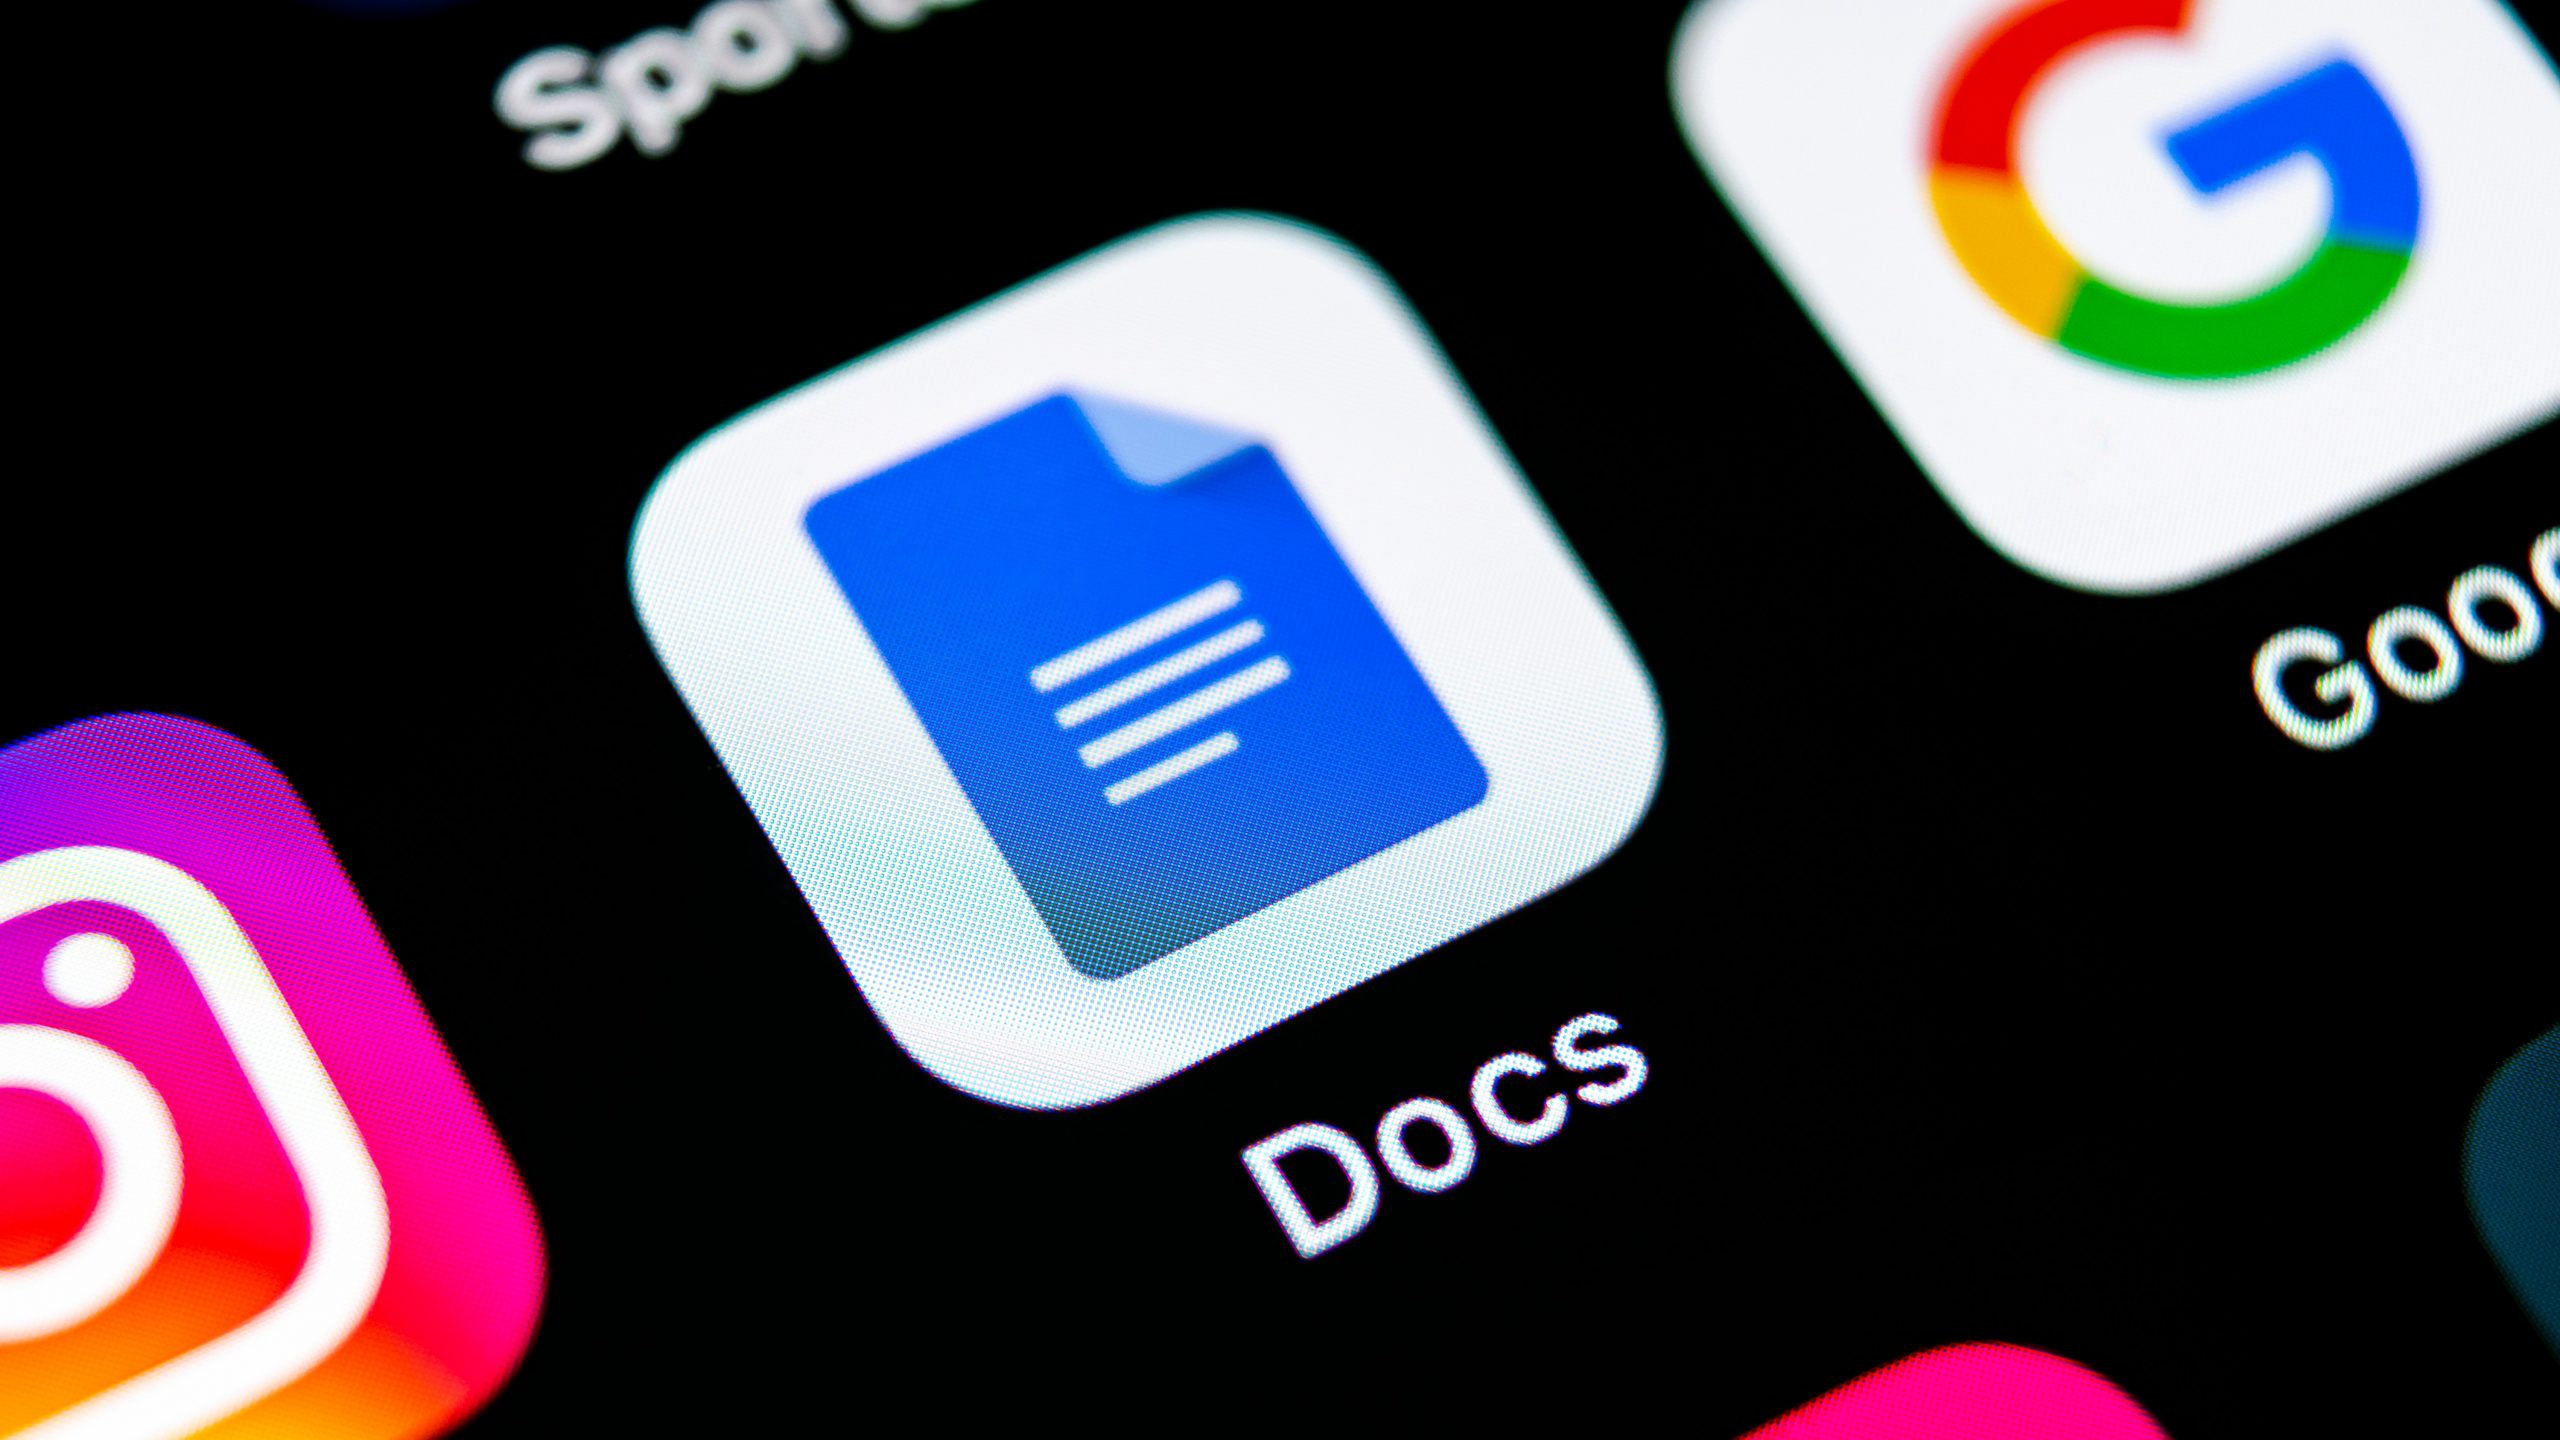 Google Makes Its Esignature Tool Available For All Docs And Drive Users